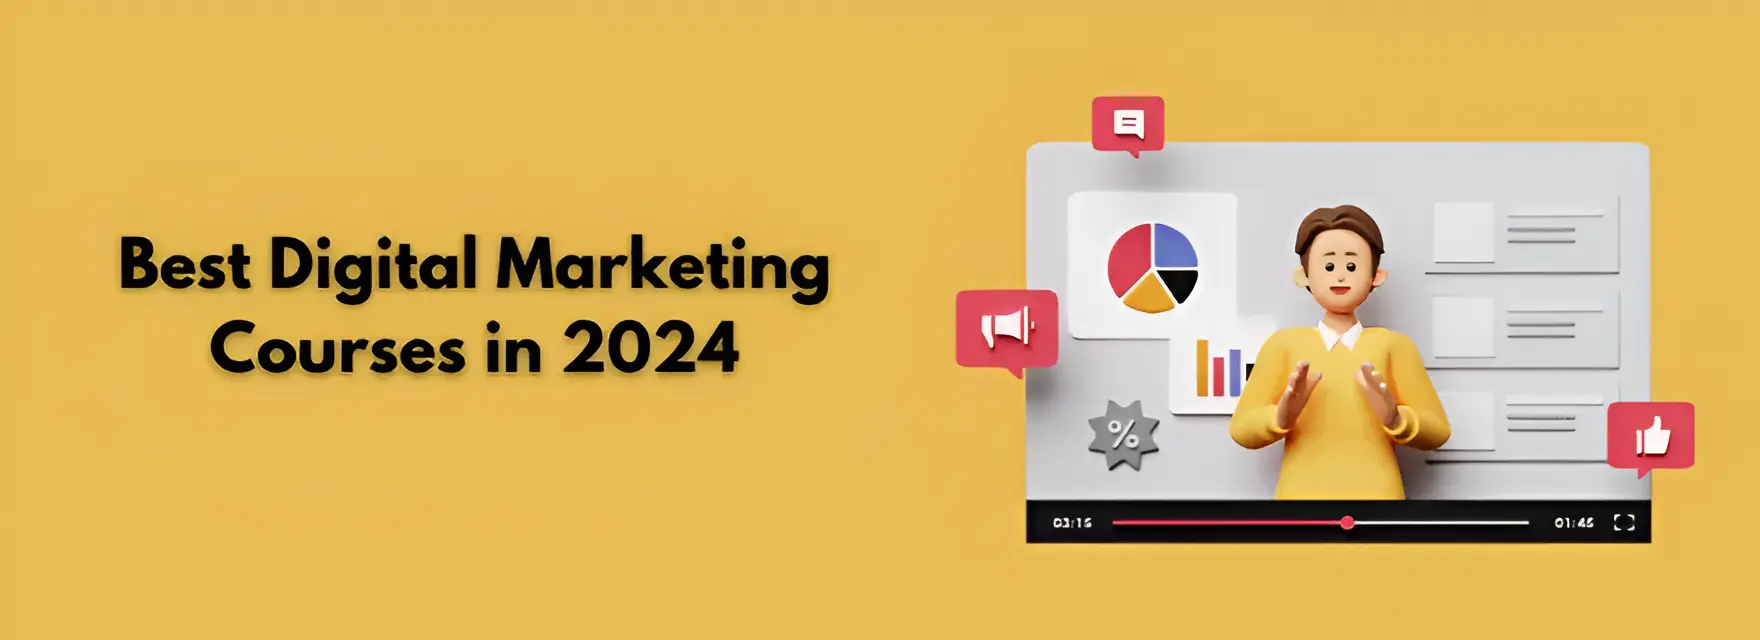 Best Digital Marketing Courses for beginners in 2024